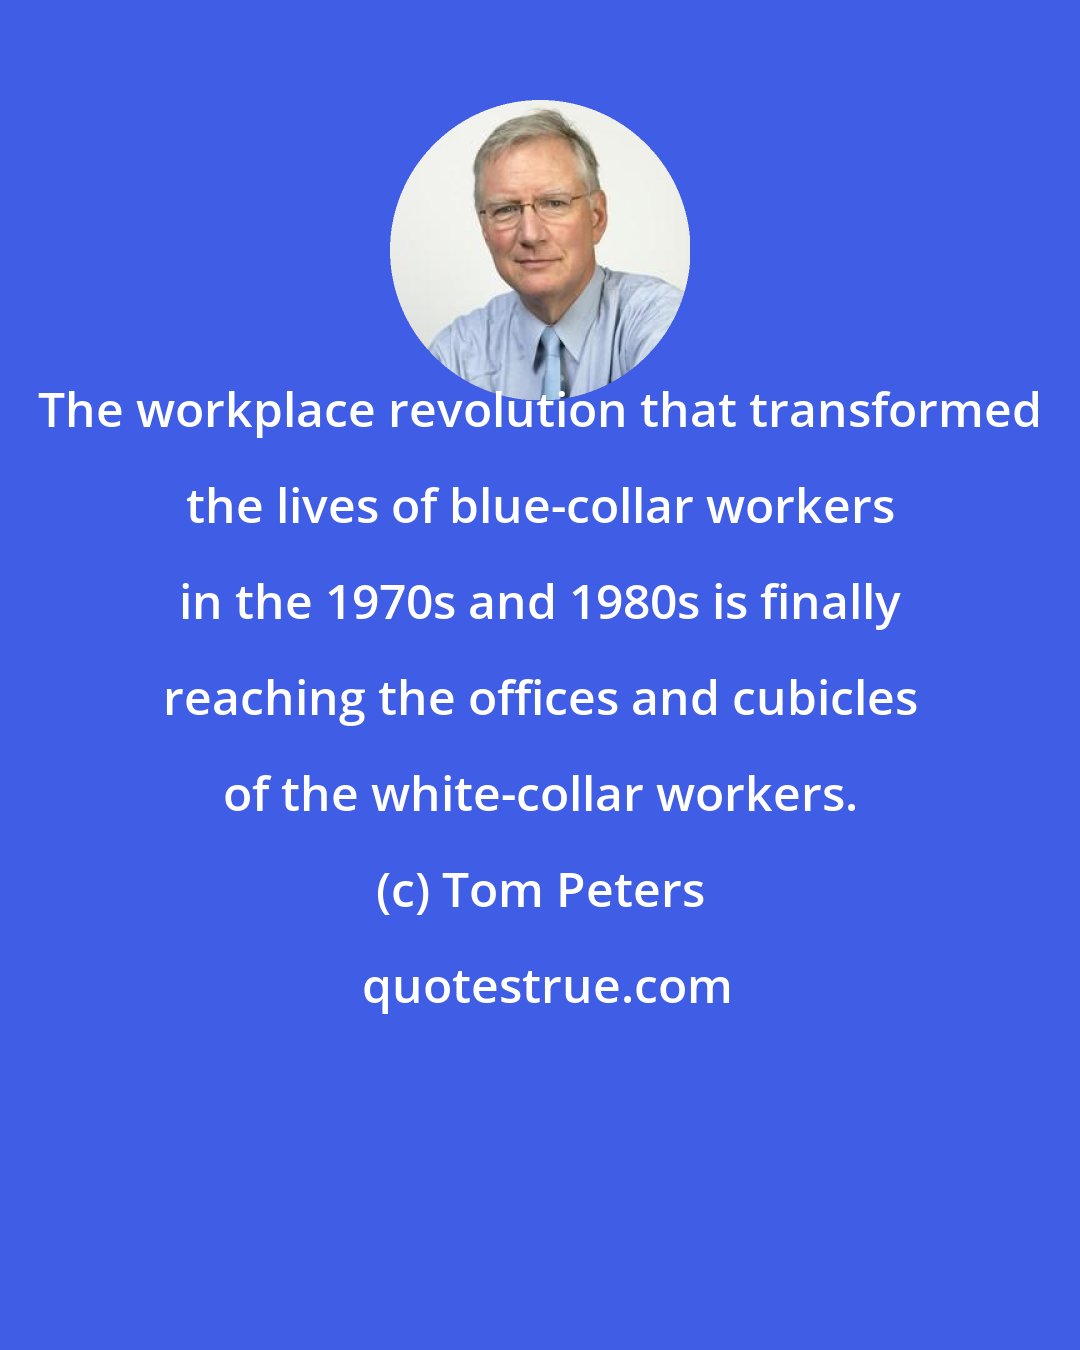 Tom Peters: The workplace revolution that transformed the lives of blue-collar workers in the 1970s and 1980s is finally reaching the offices and cubicles of the white-collar workers.